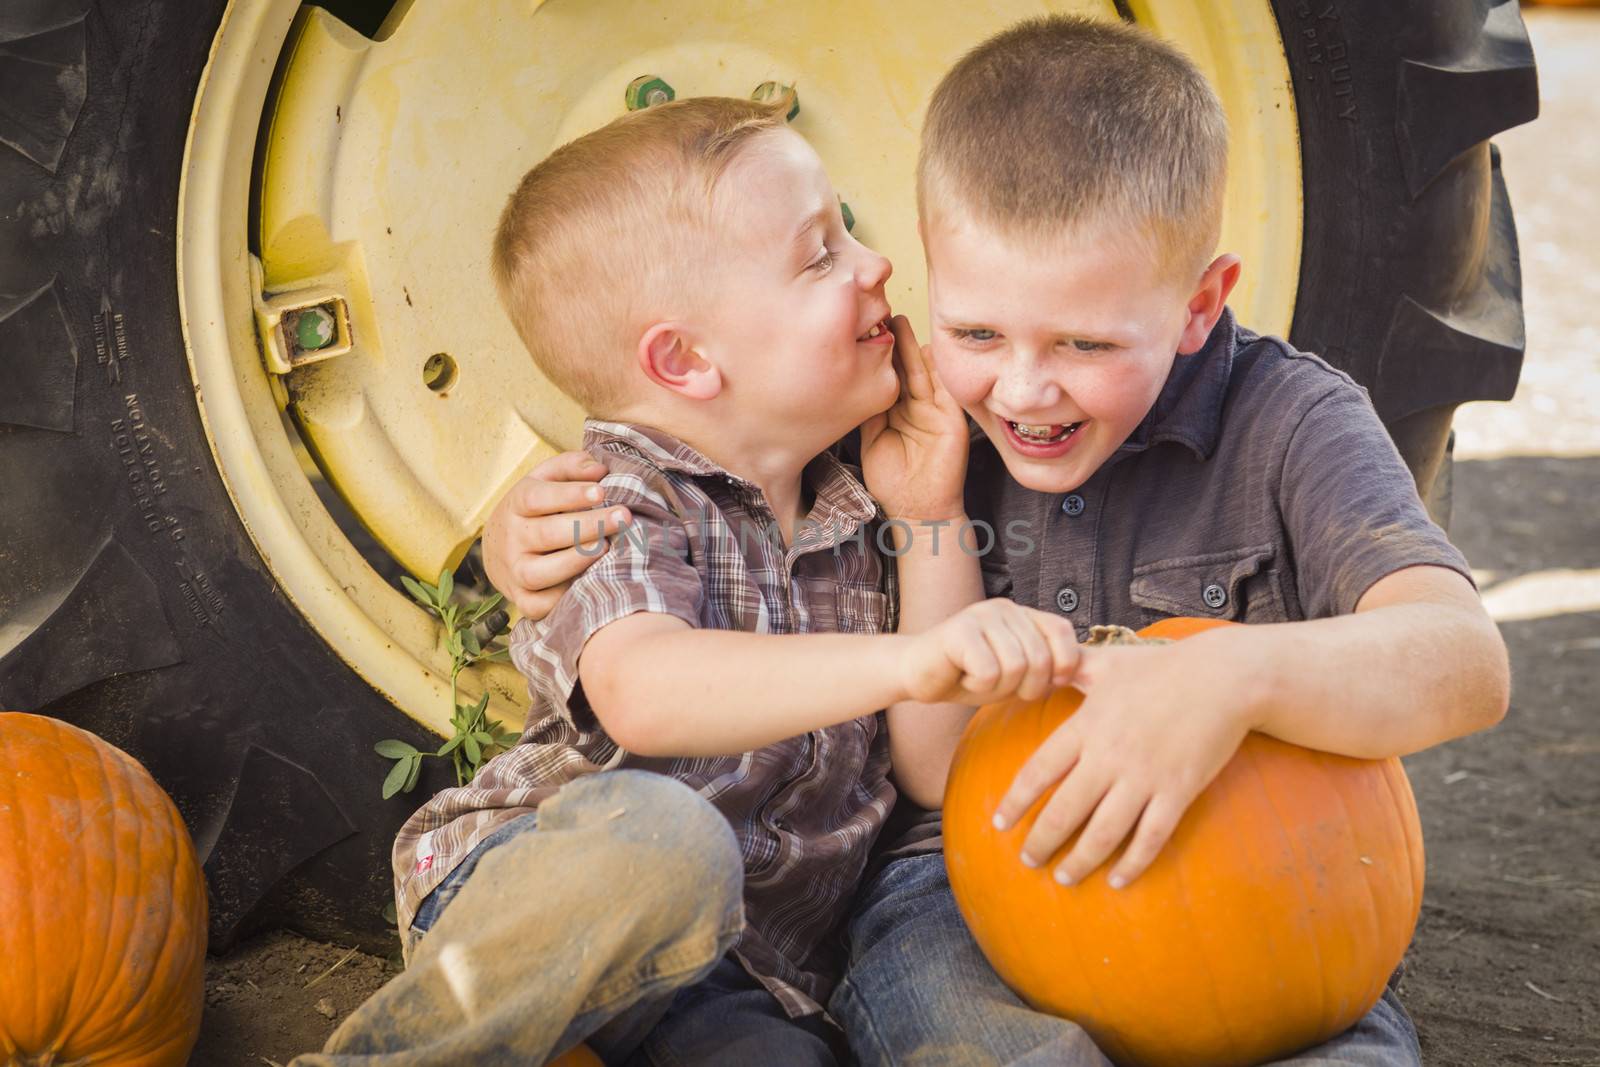 Two Boys Sitting Against a Tractor Tire Holding Pumpkins and Whispering Secrets in Rustic Setting.